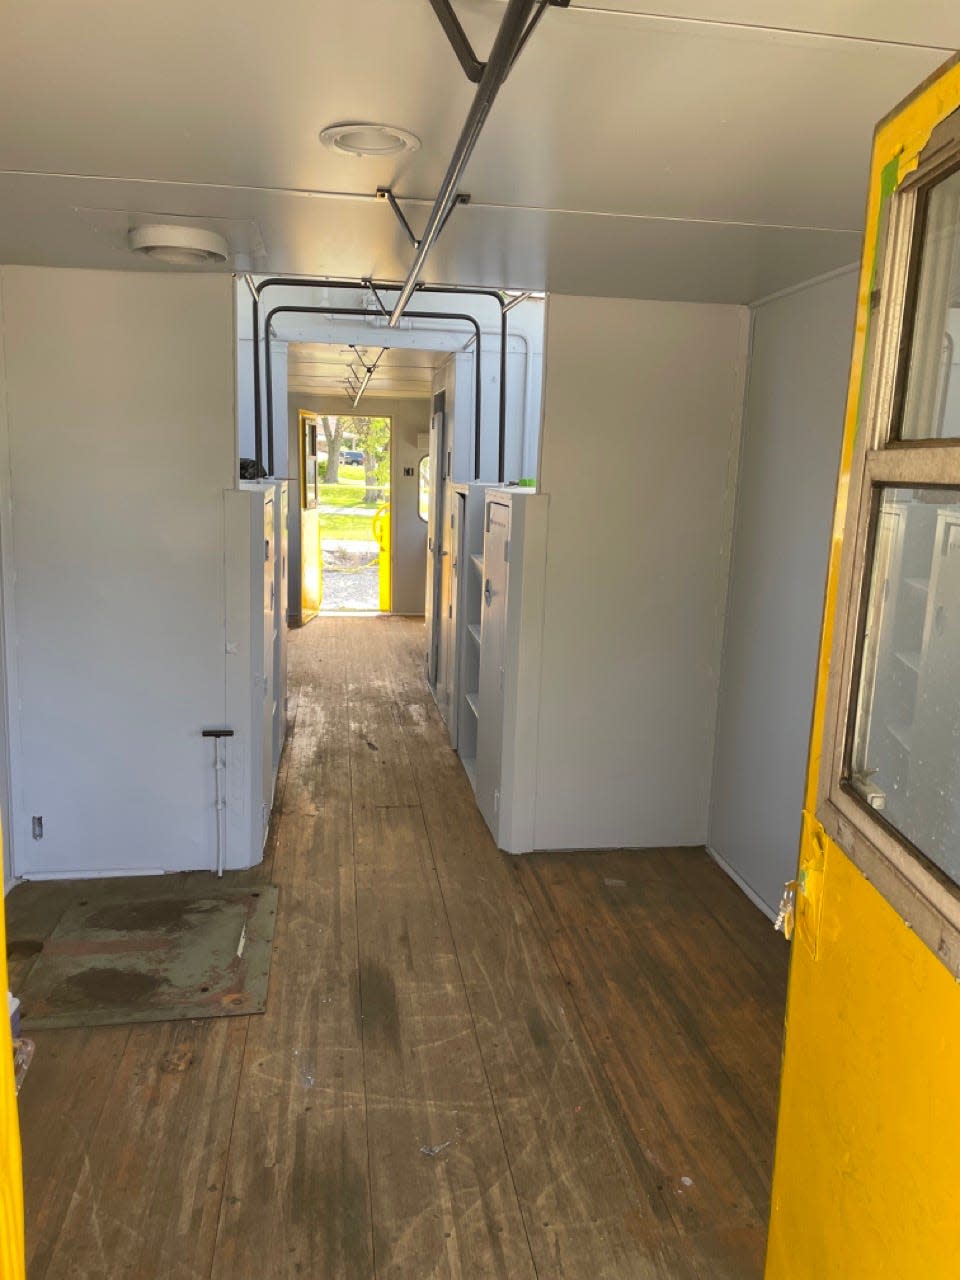 Inside the Chessie System caboose with newly painted white walls and a bright yellow door. 